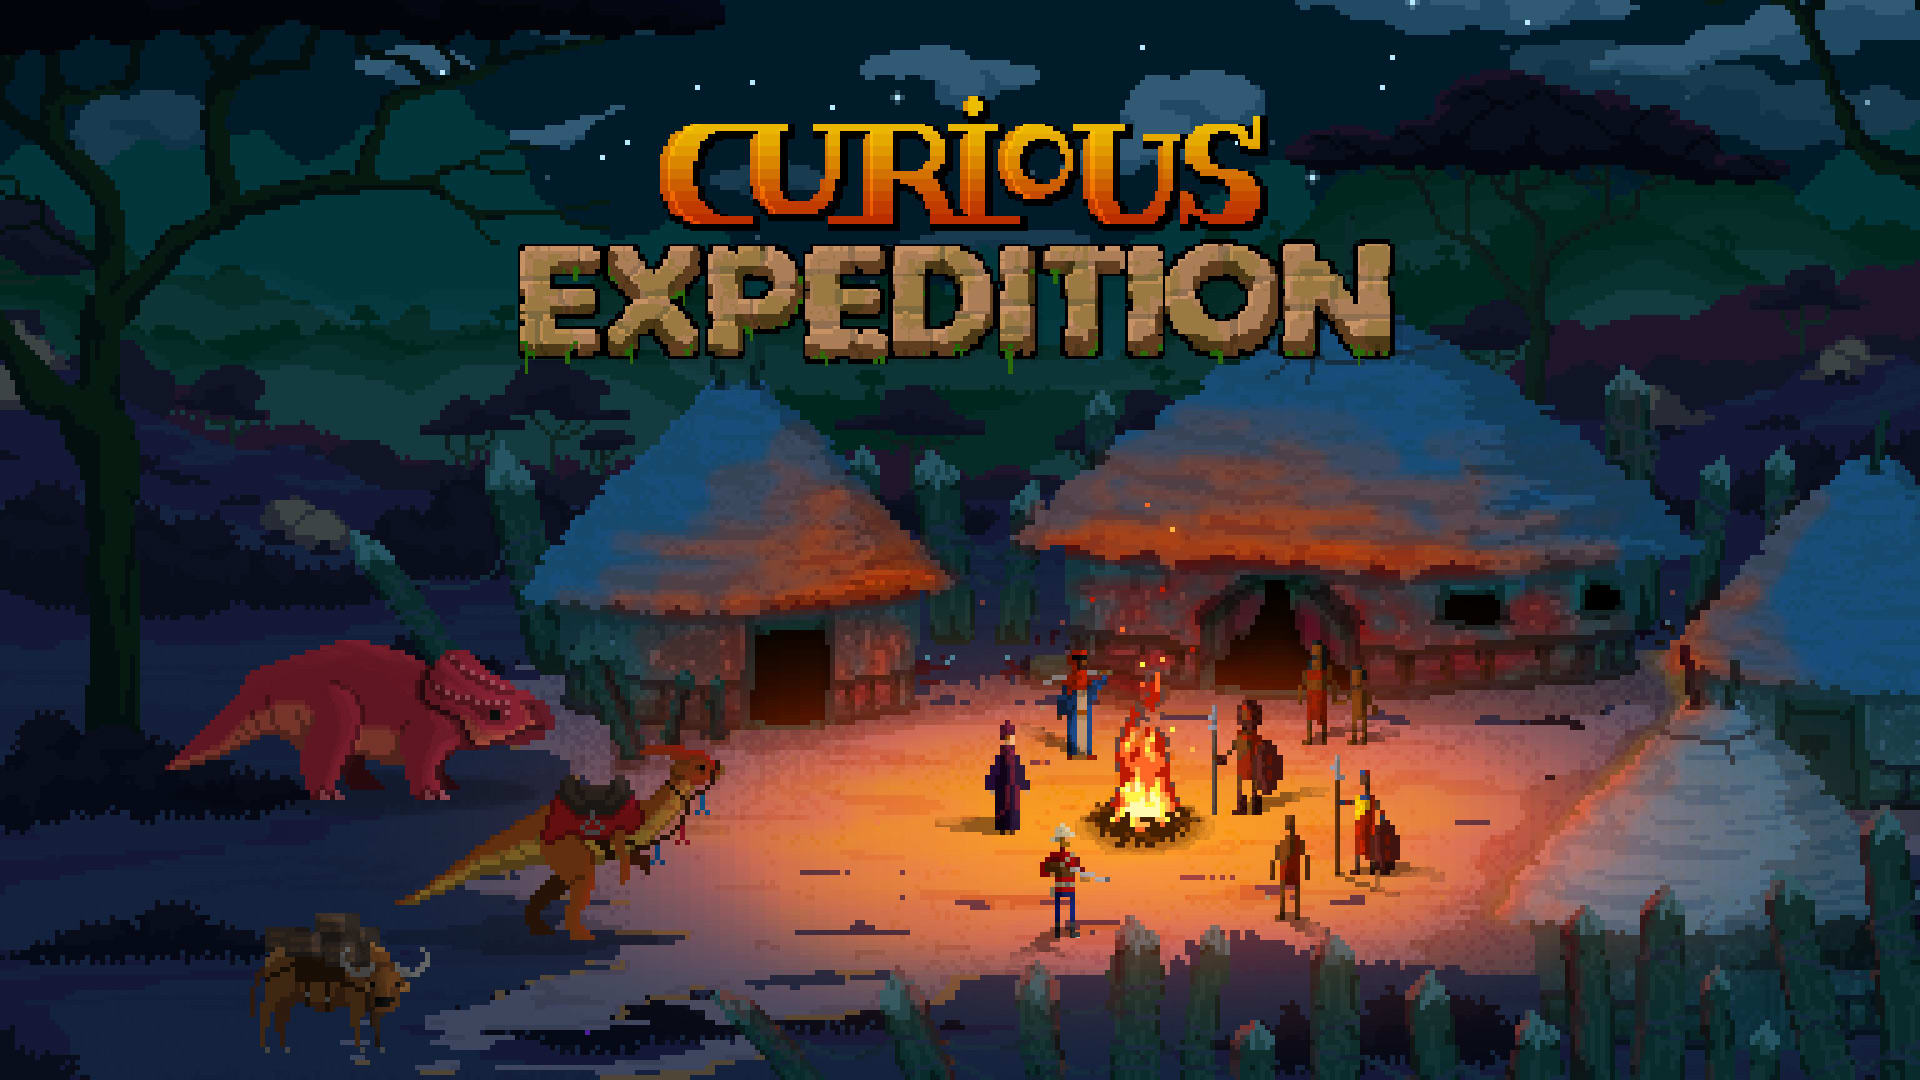 Curious Expedition 1